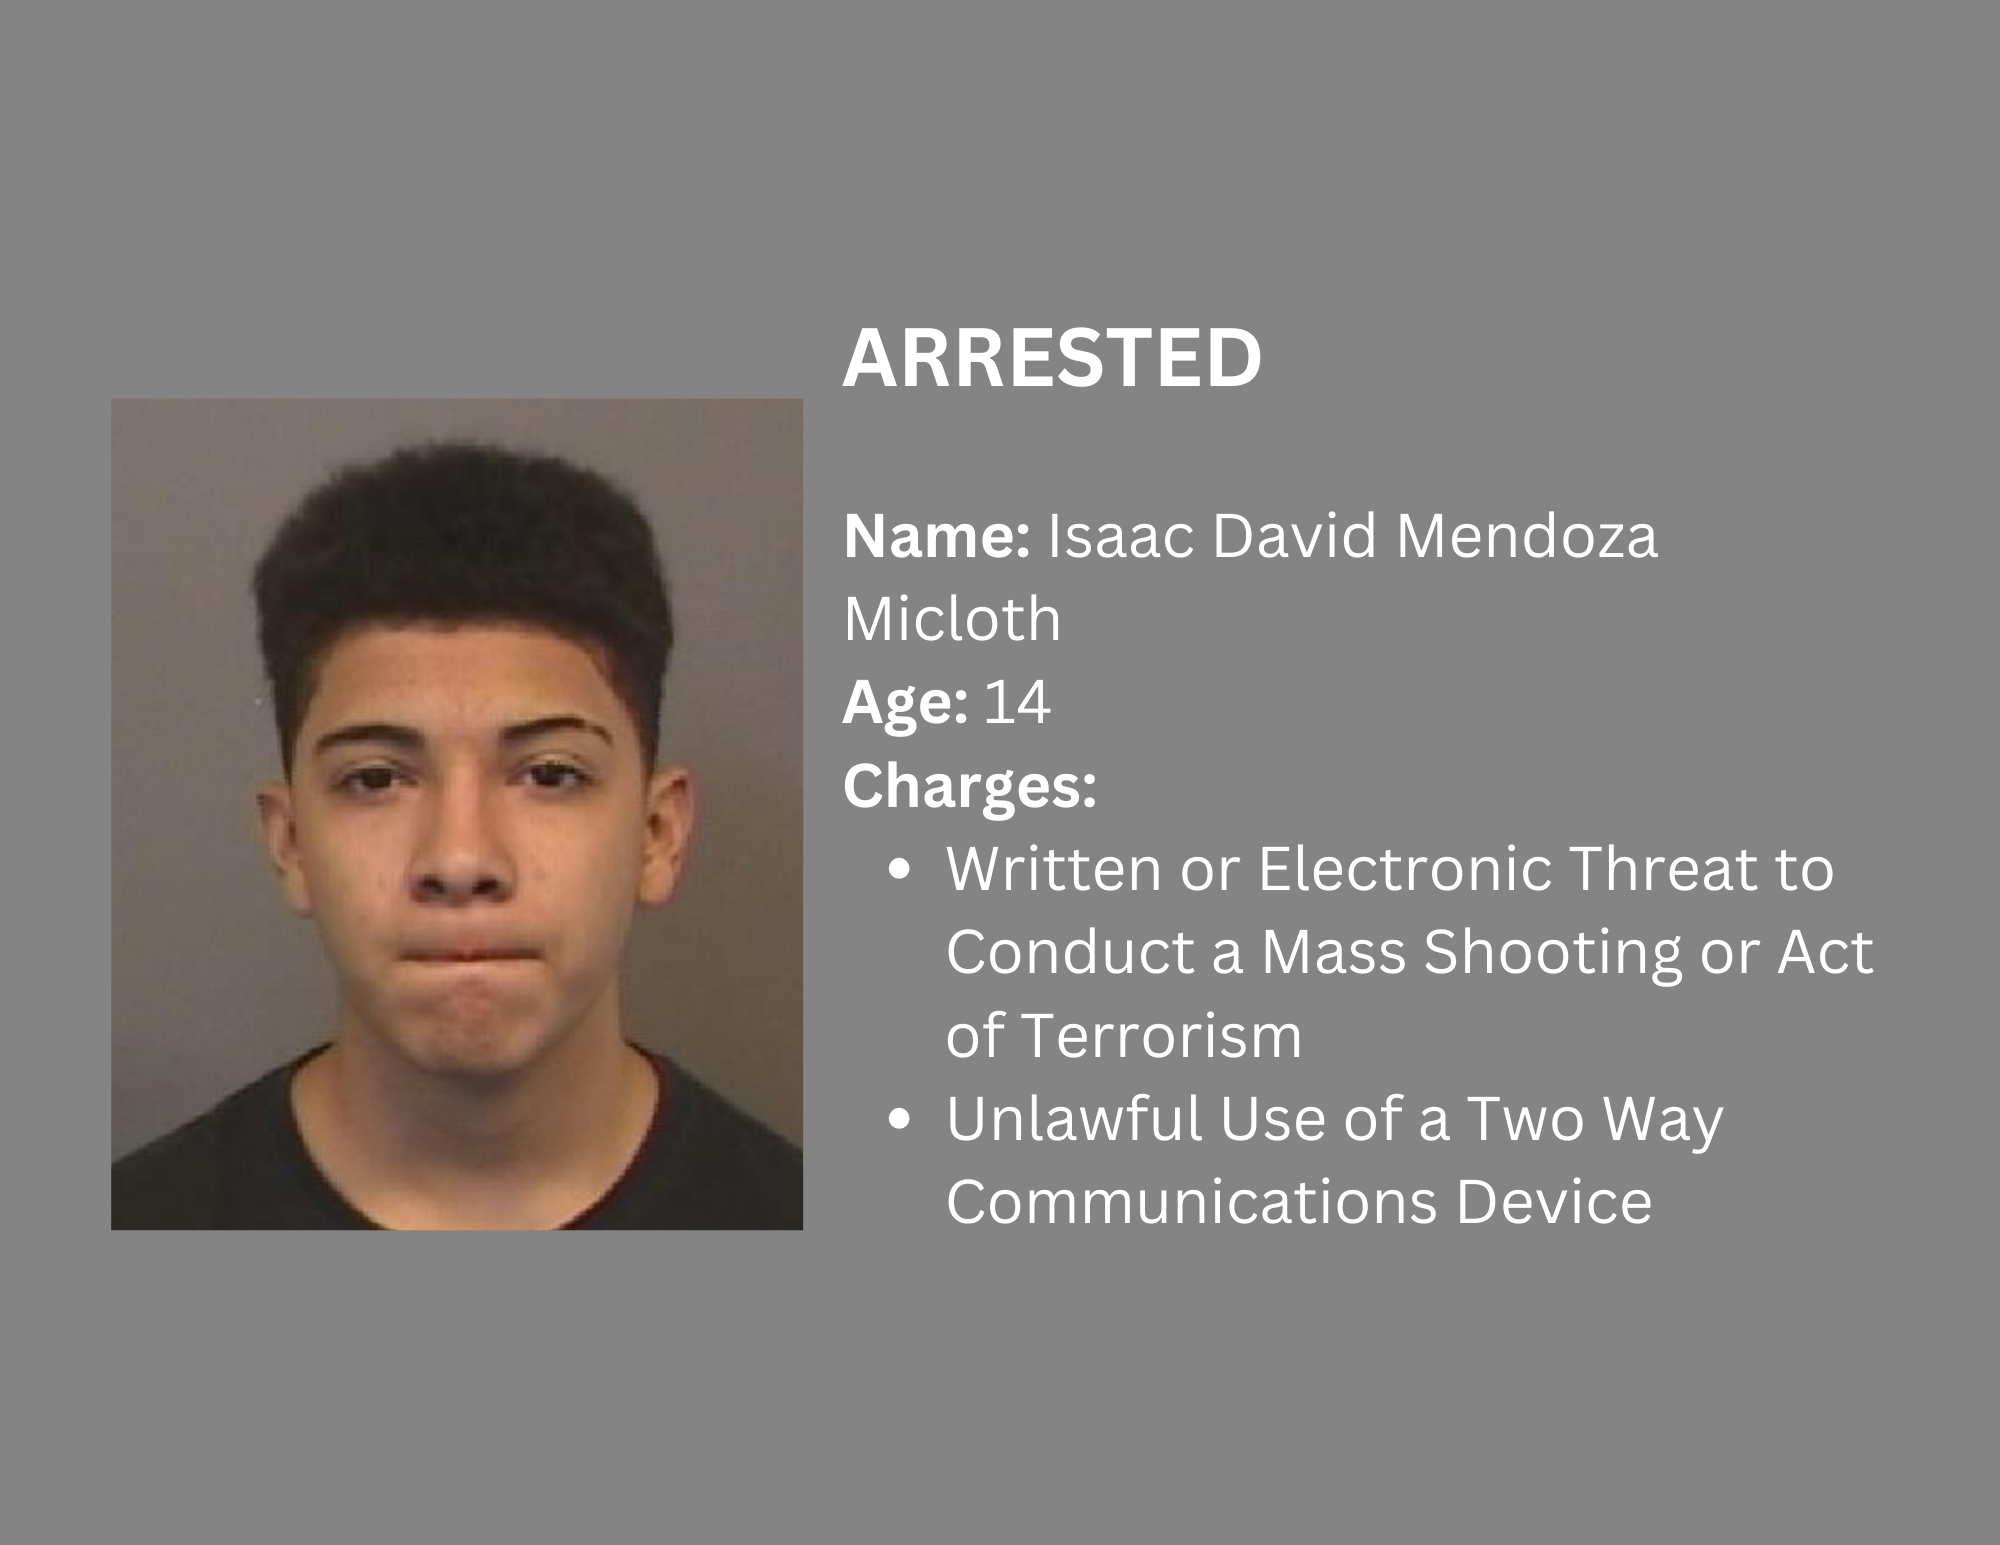 TEEN ARRESTED FOR THREATENING MASS SHOOTING IN TEXAS